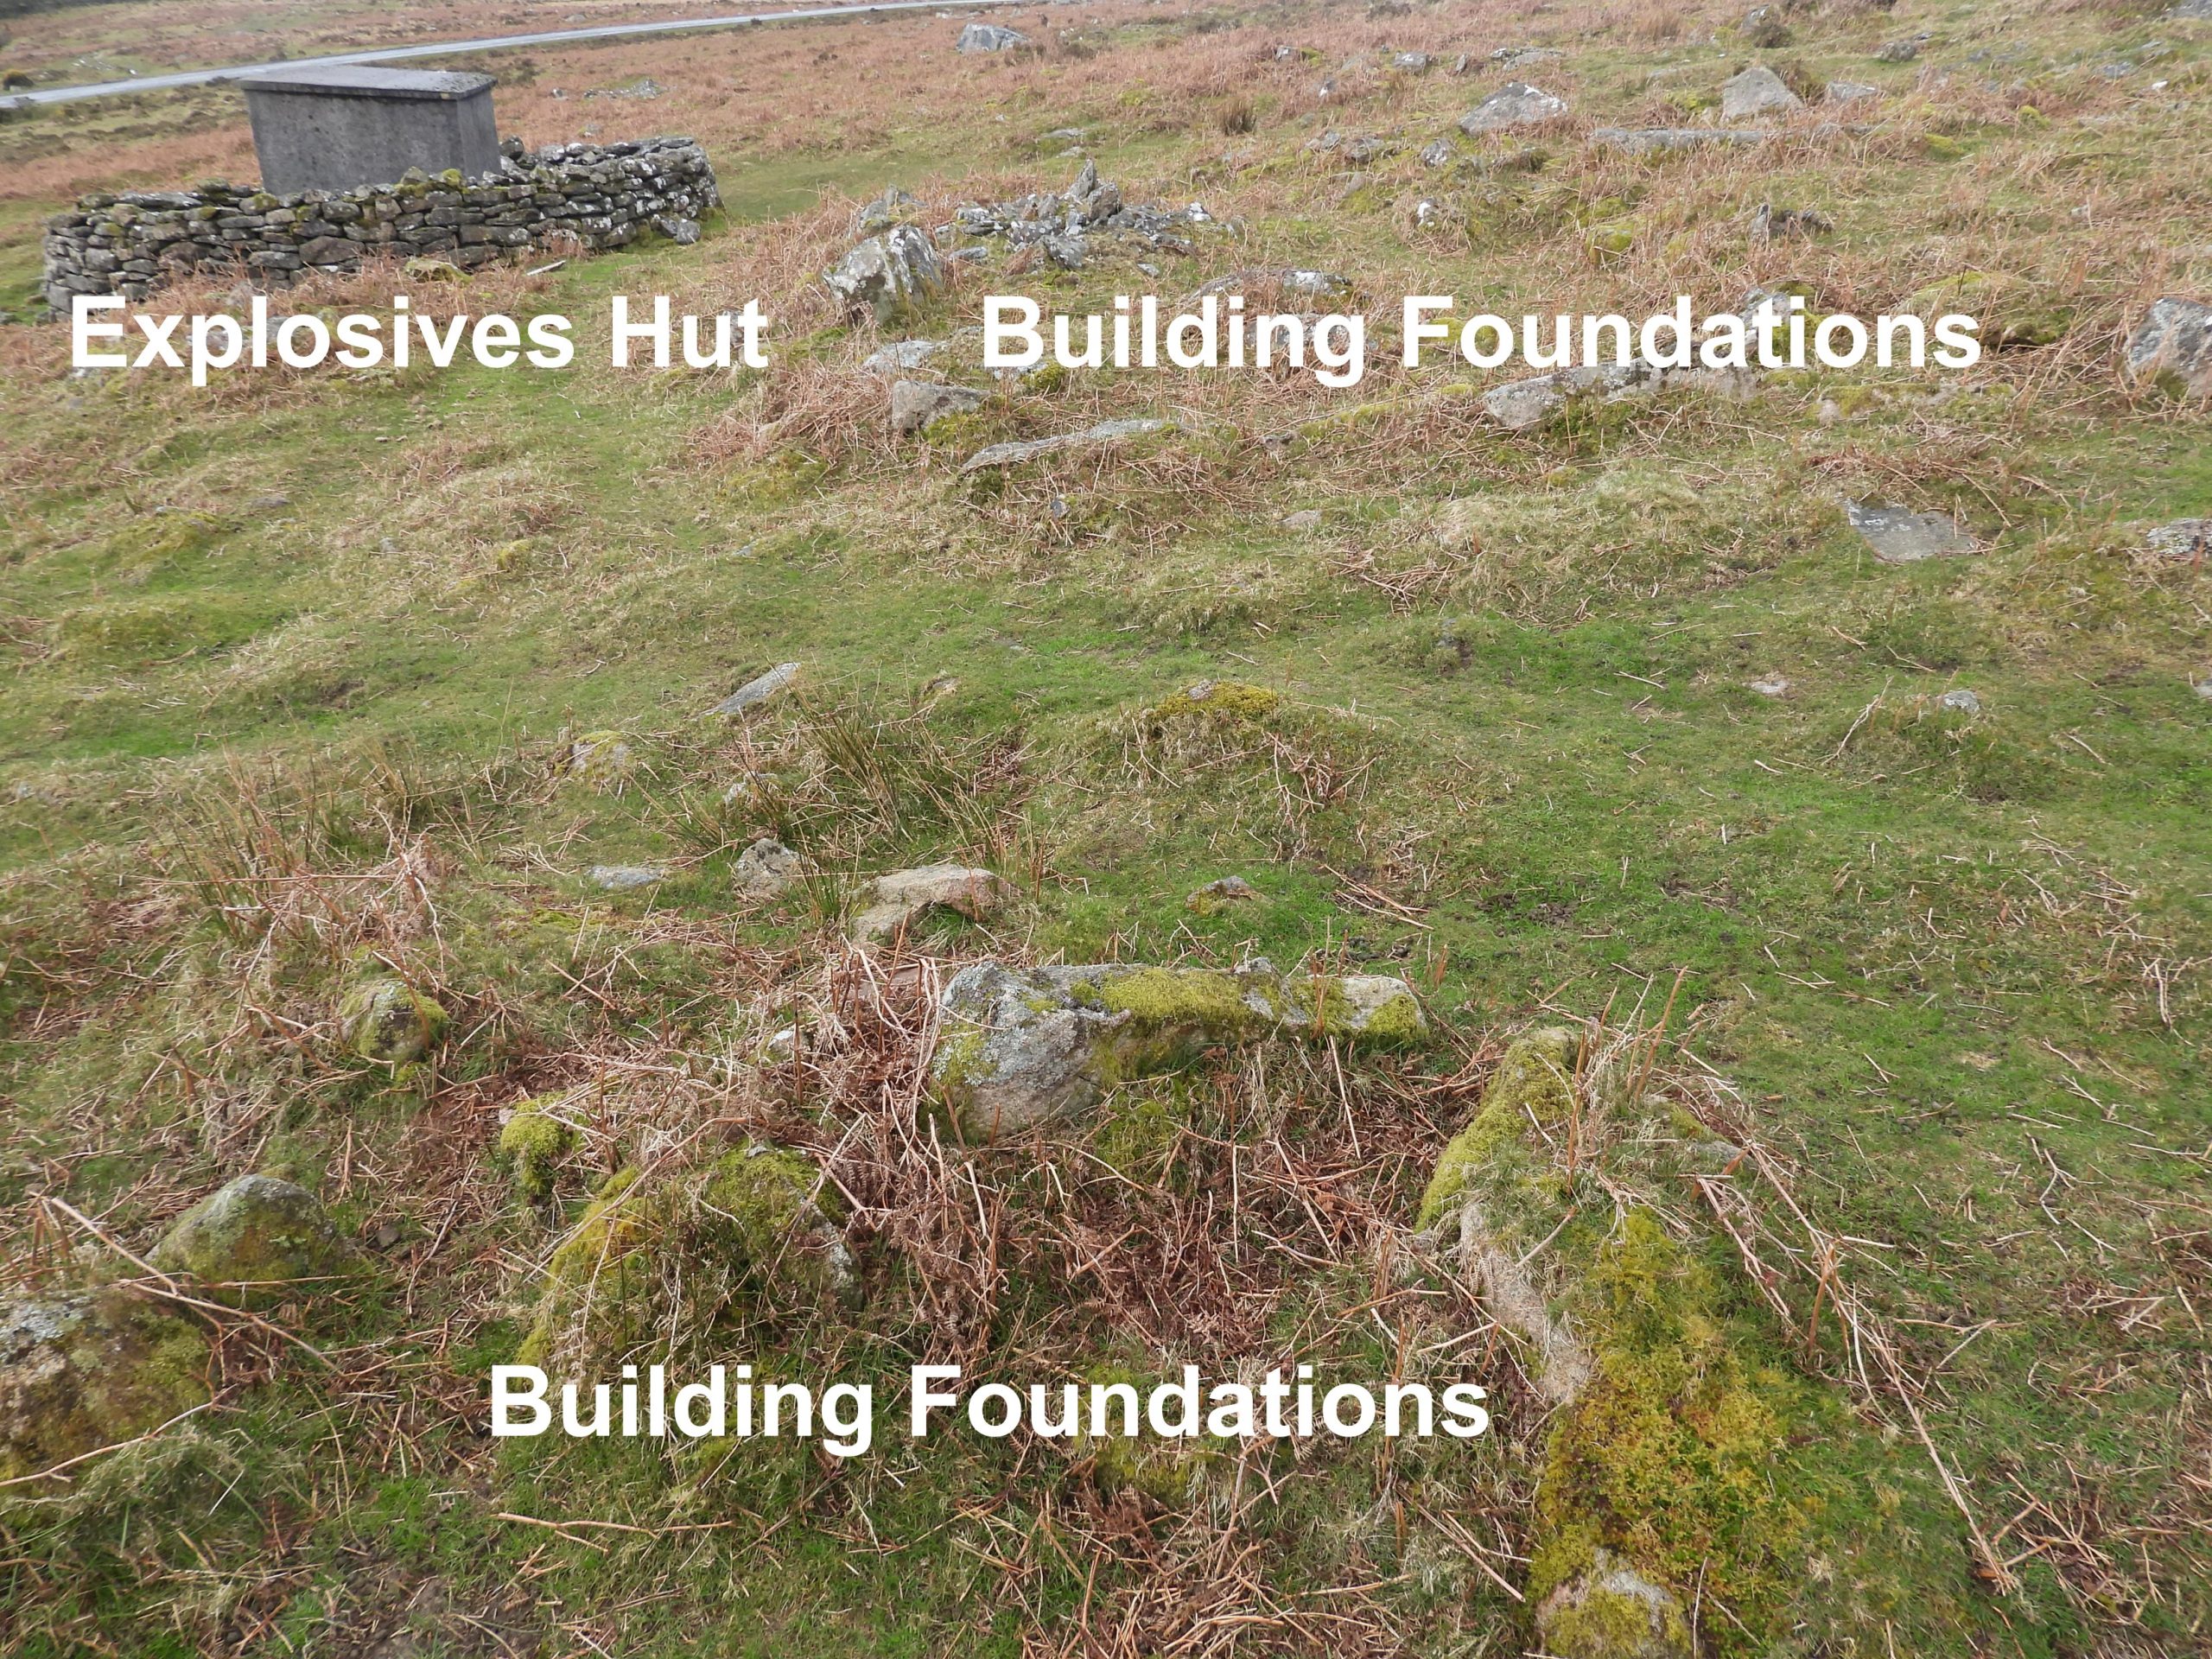 8. Building Foundations a